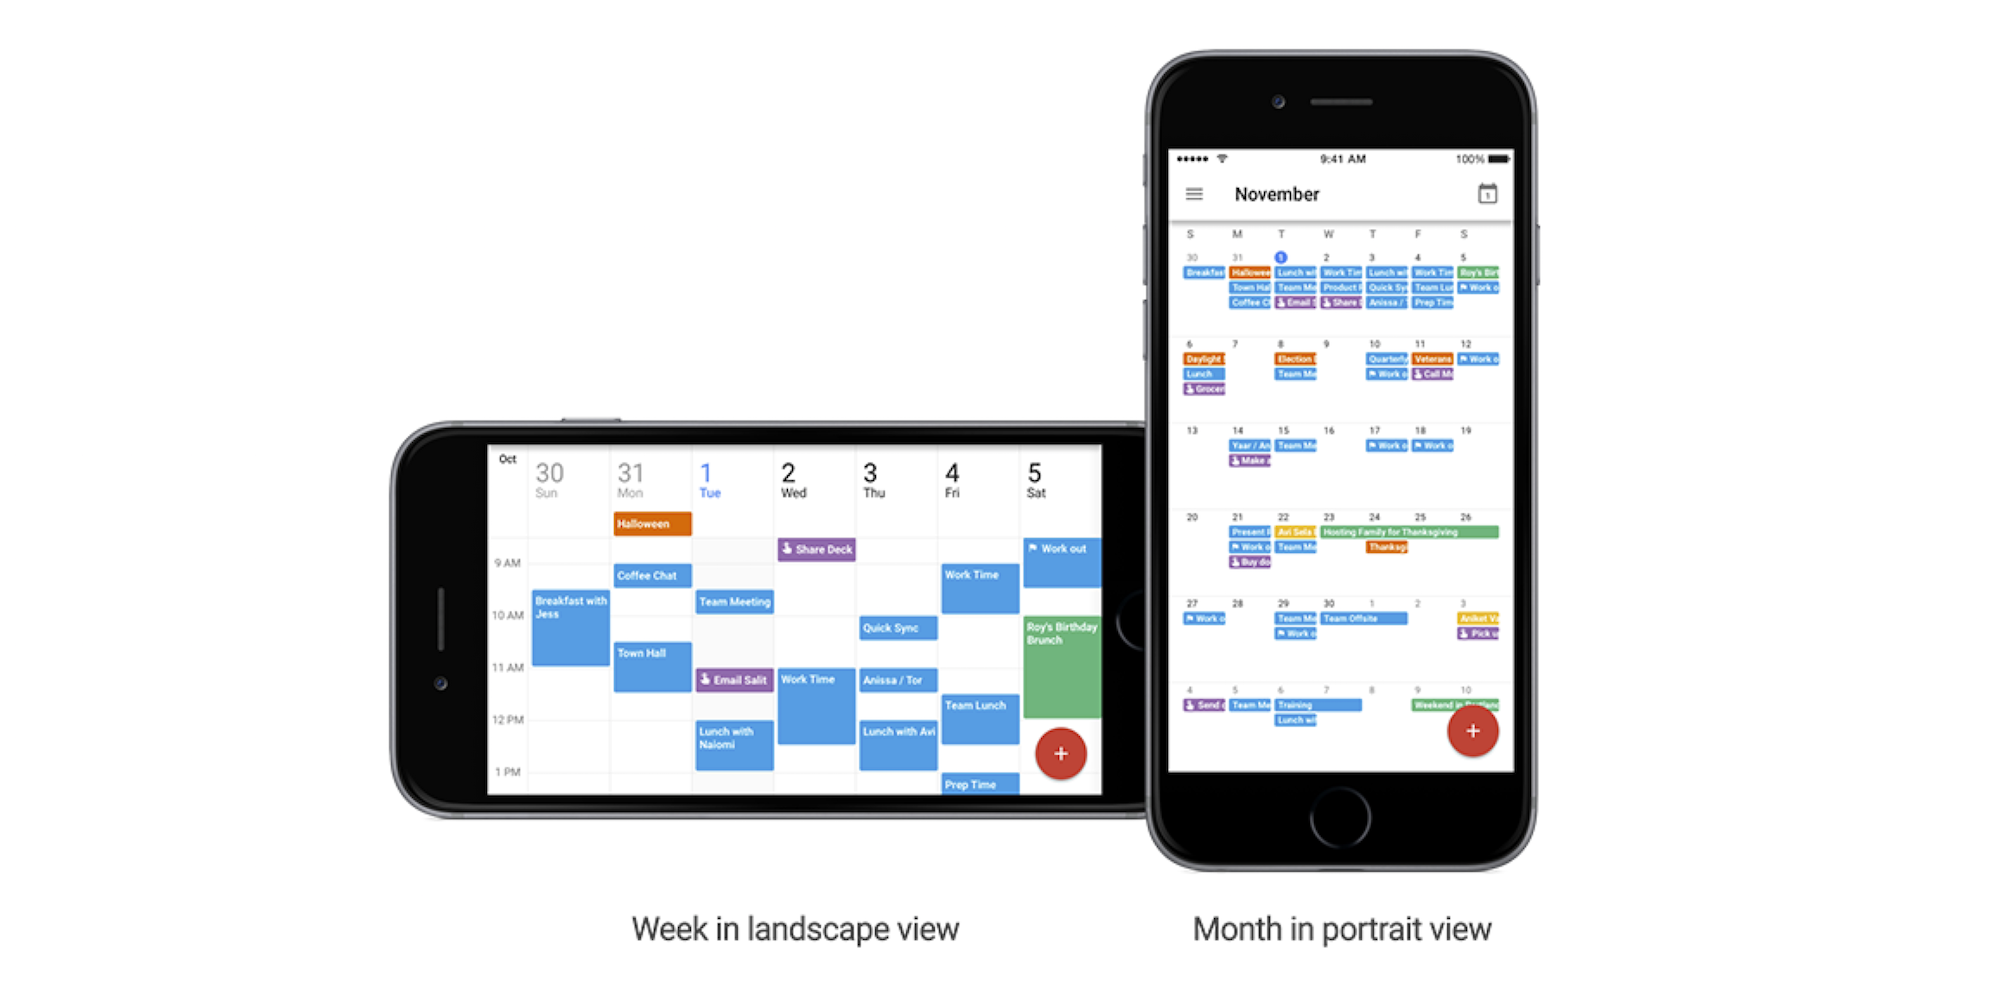 Google Calendar for iPhone adds Spotlight Search, month view, week view